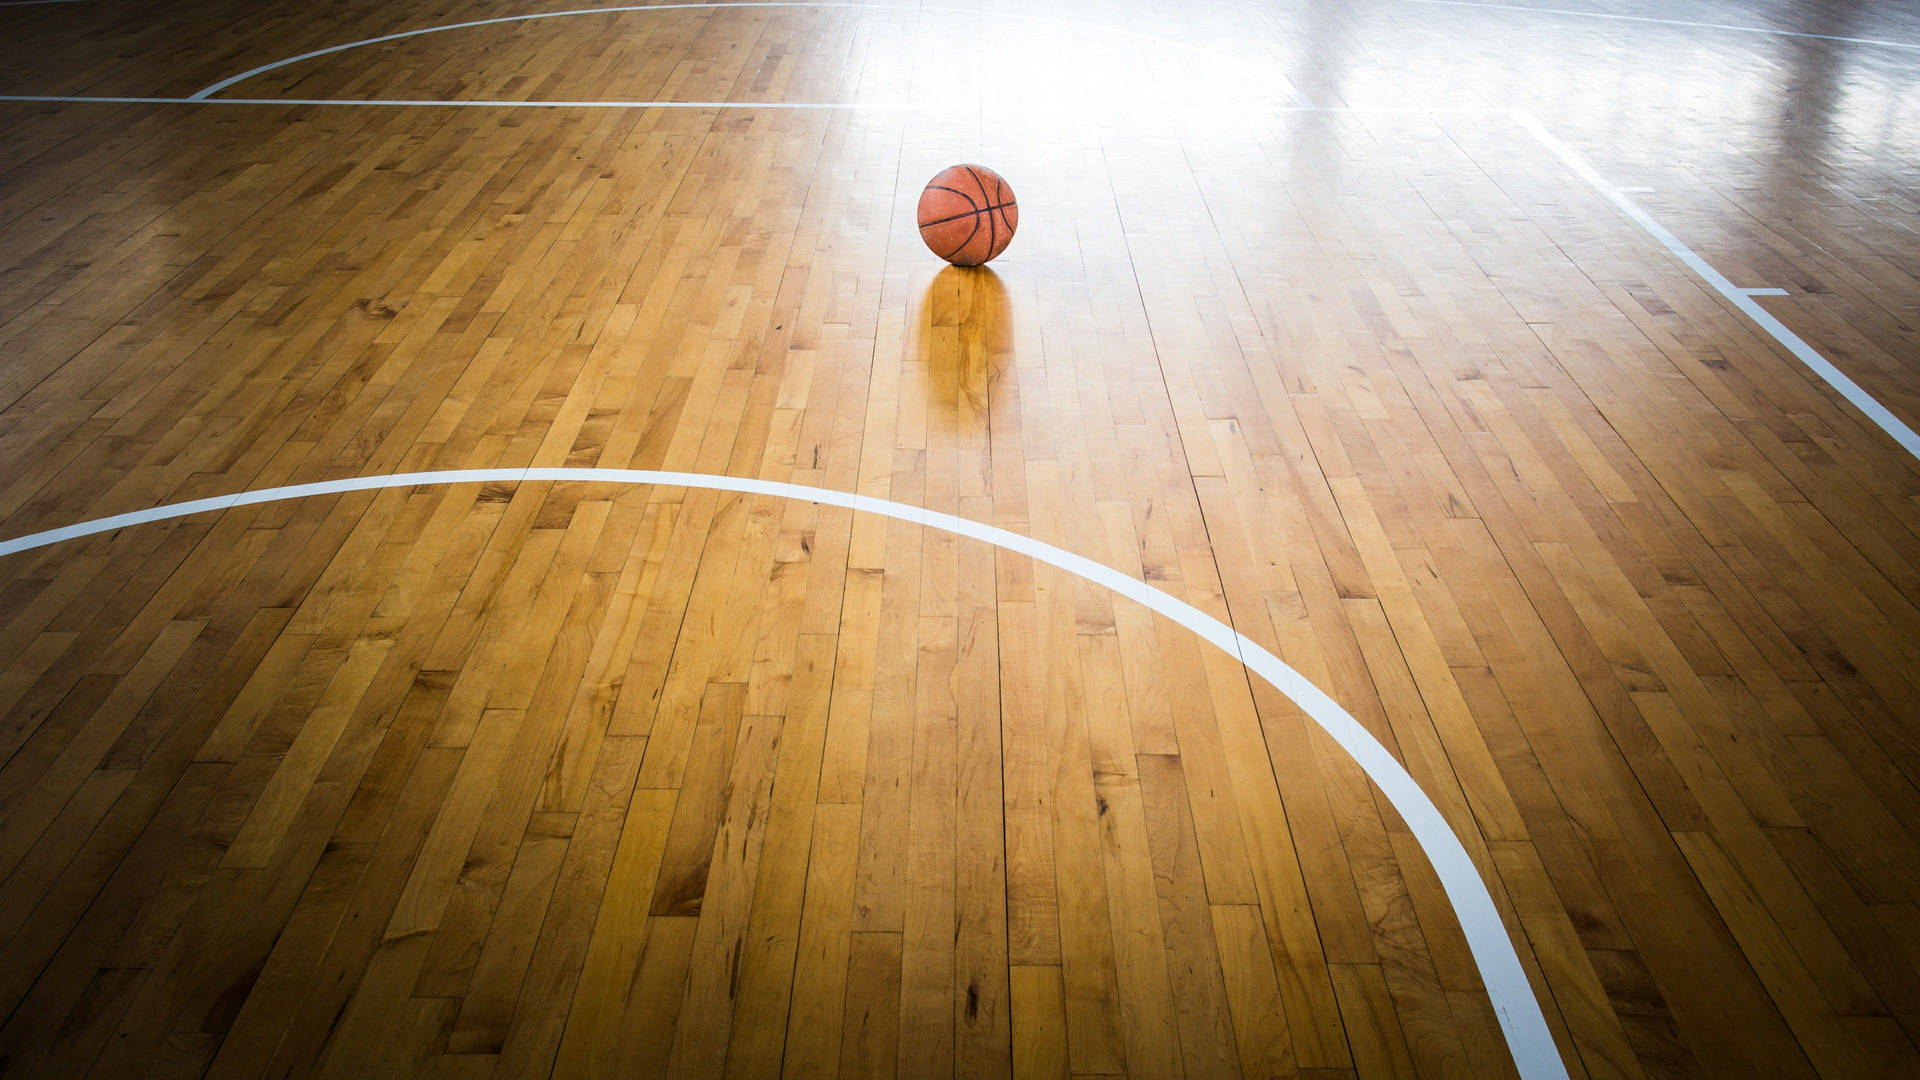 An Awe-Inspiring View of the Game – A Close-Up Shot of a Basketball on a Concrete Court Wallpaper